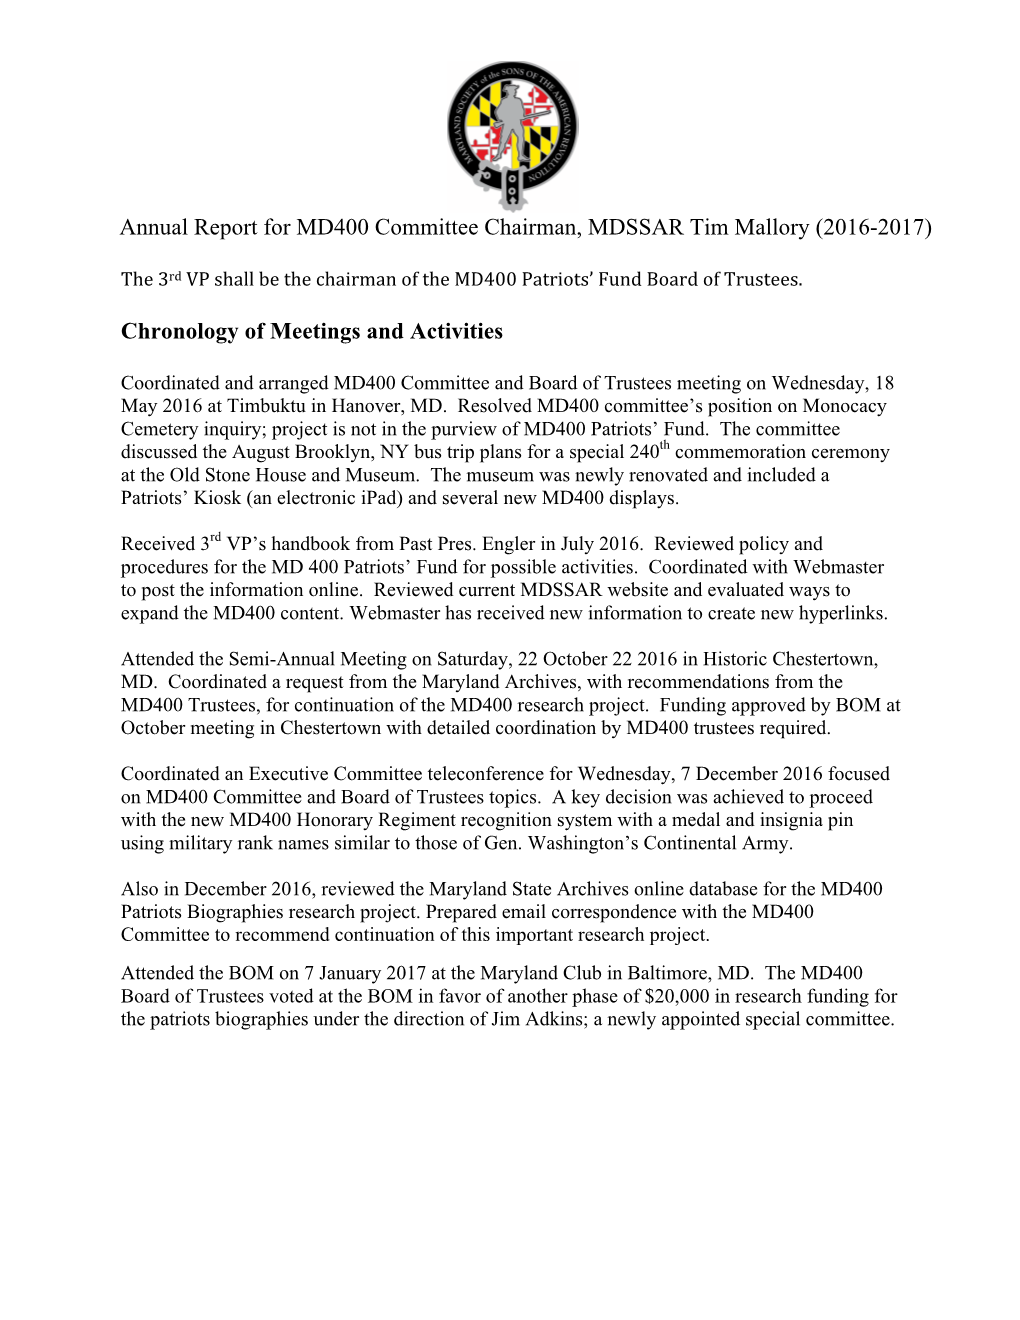 Annual Report for MD400 Committee Chairman, MDSSAR Tim Mallory (2016-2017)